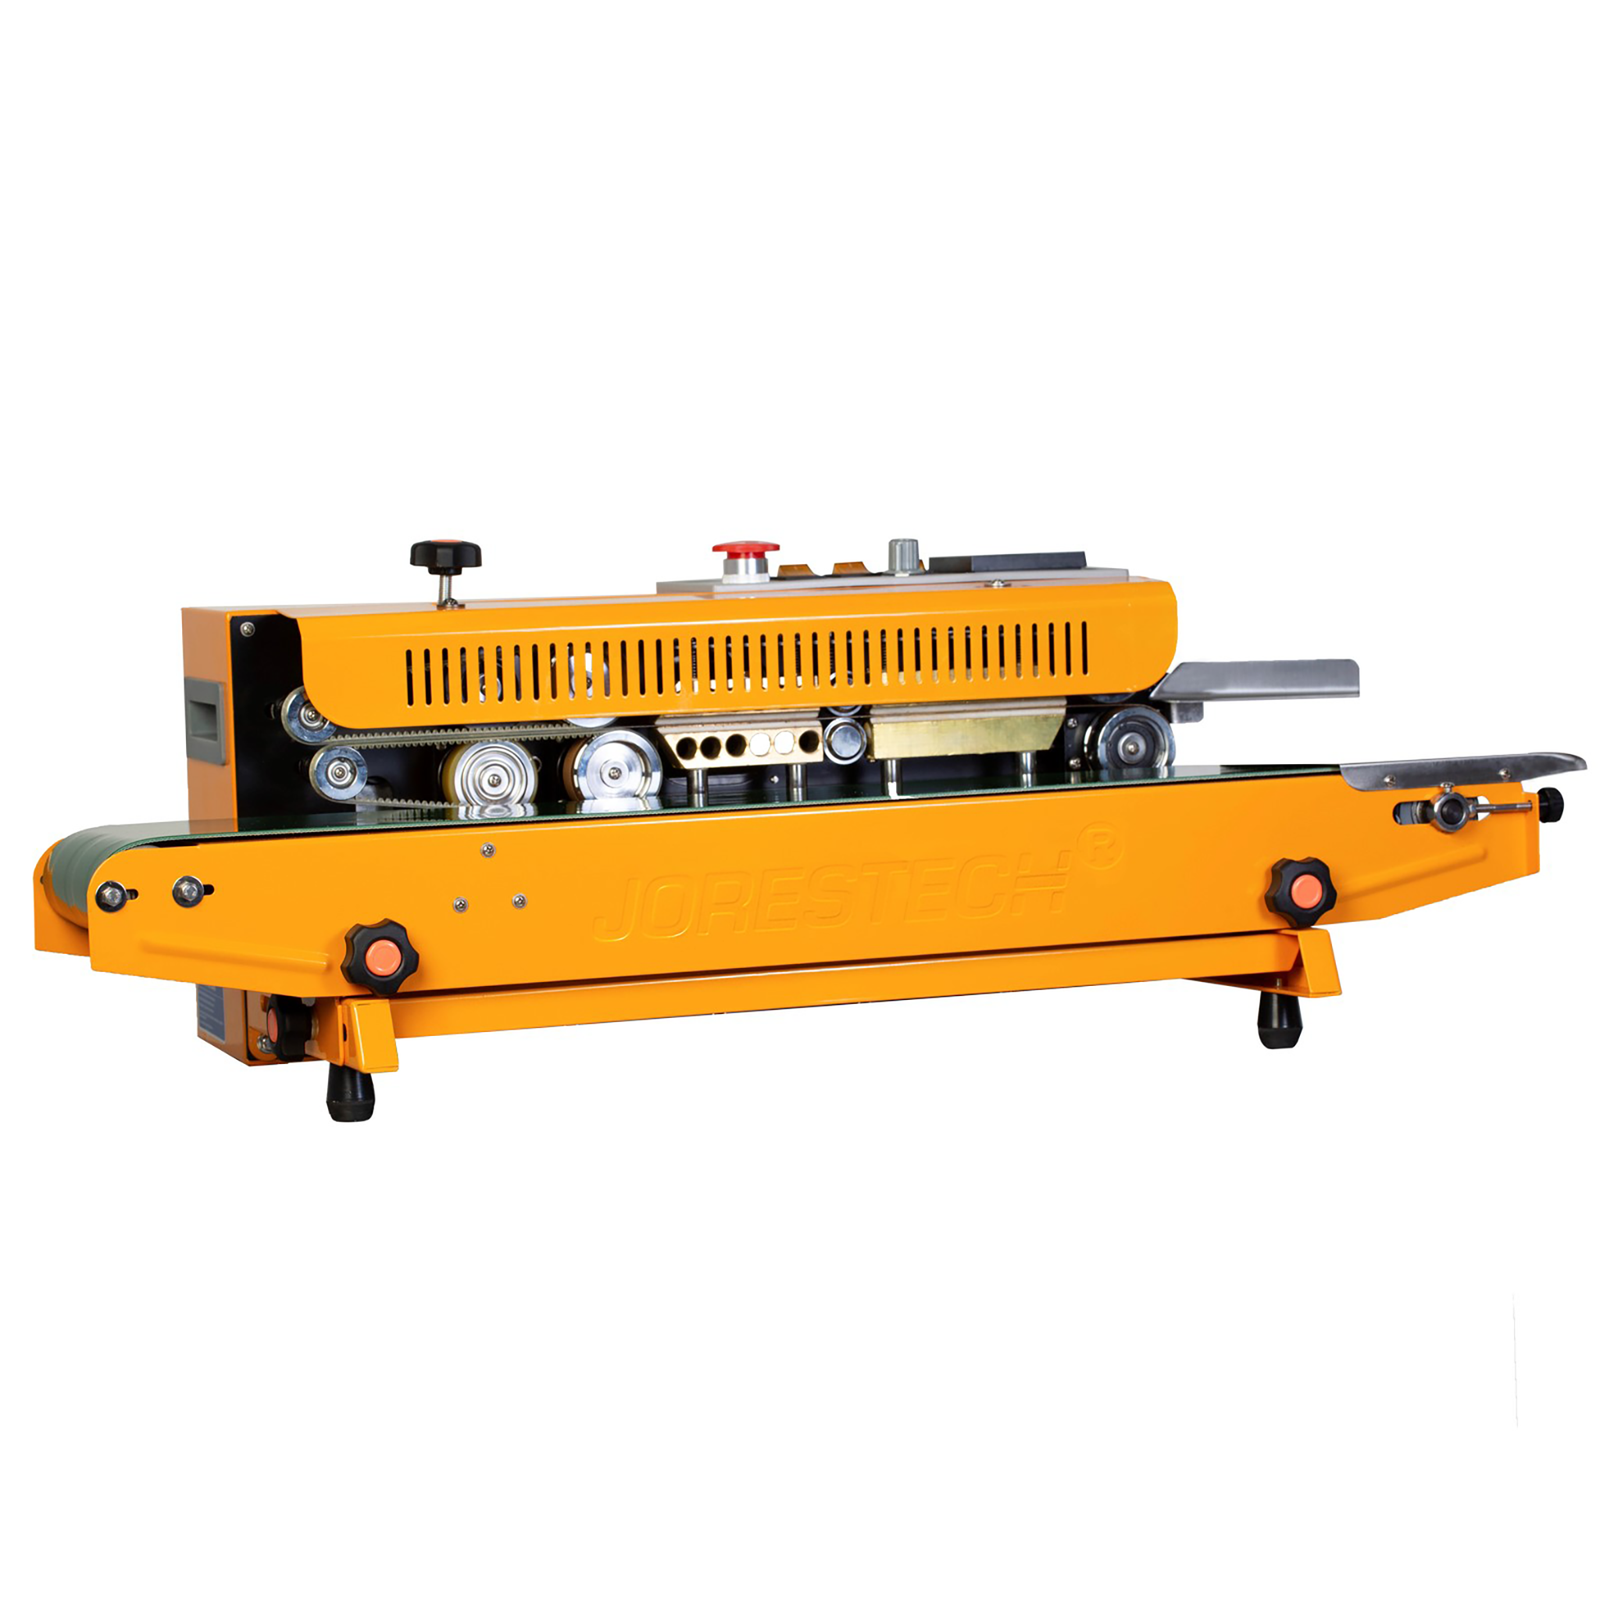 Front view of the JORESTECH horizontal continuous band sealer. The machine is yellow over white background